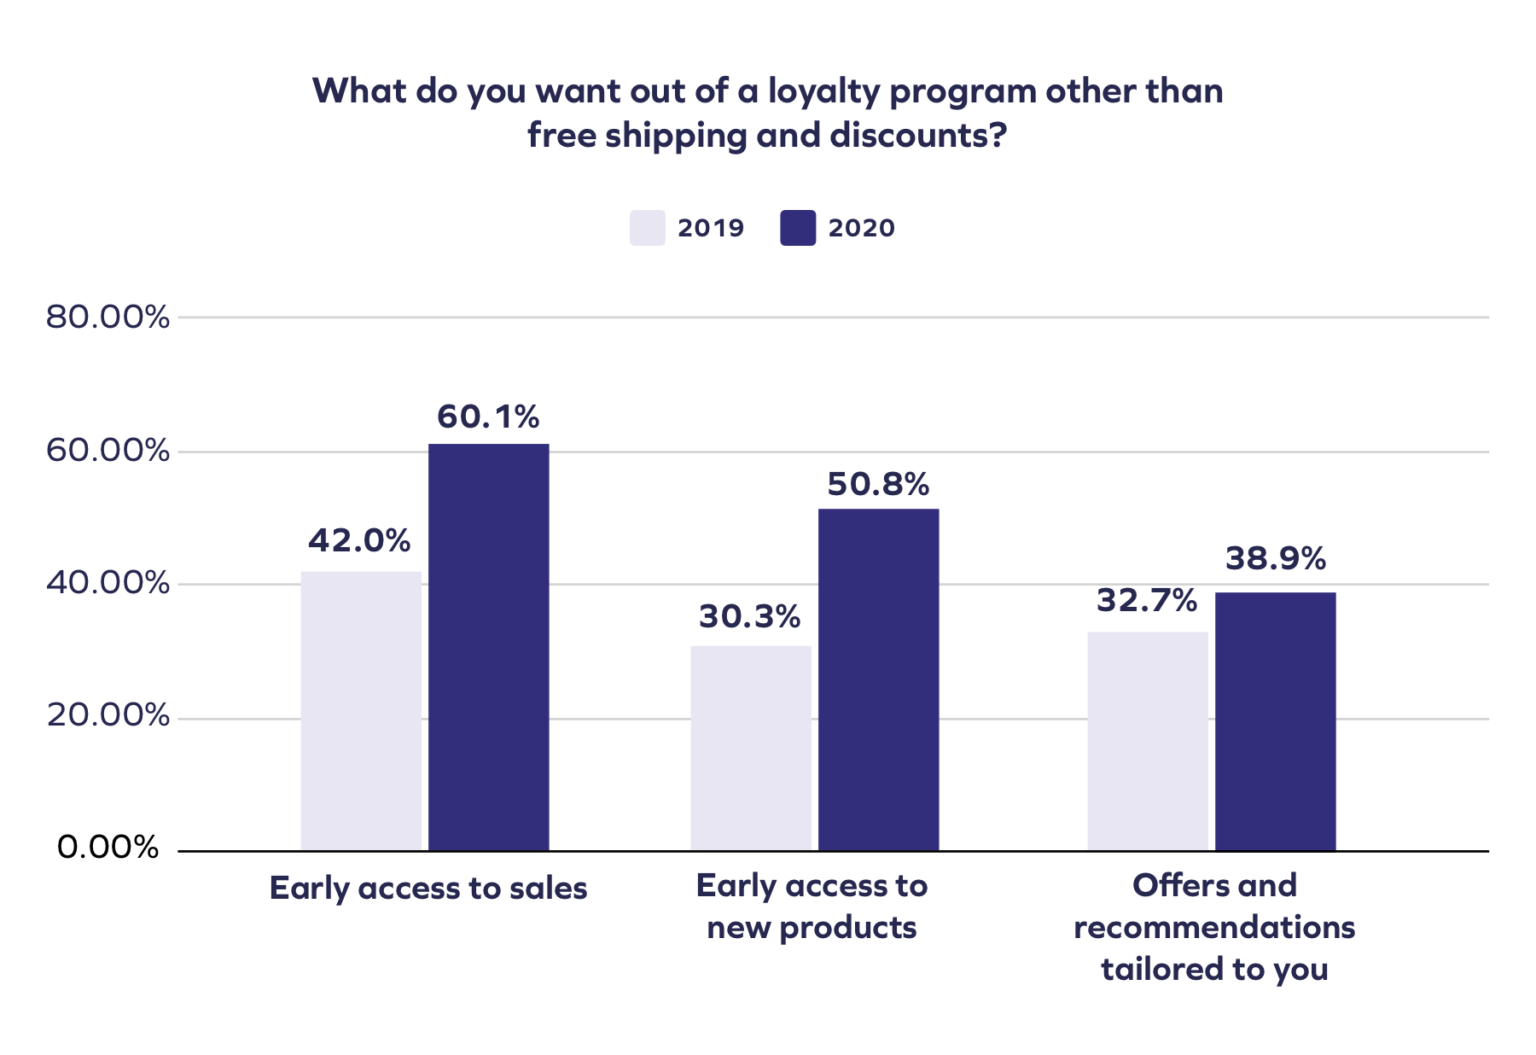 What do people want from a loyalty program?